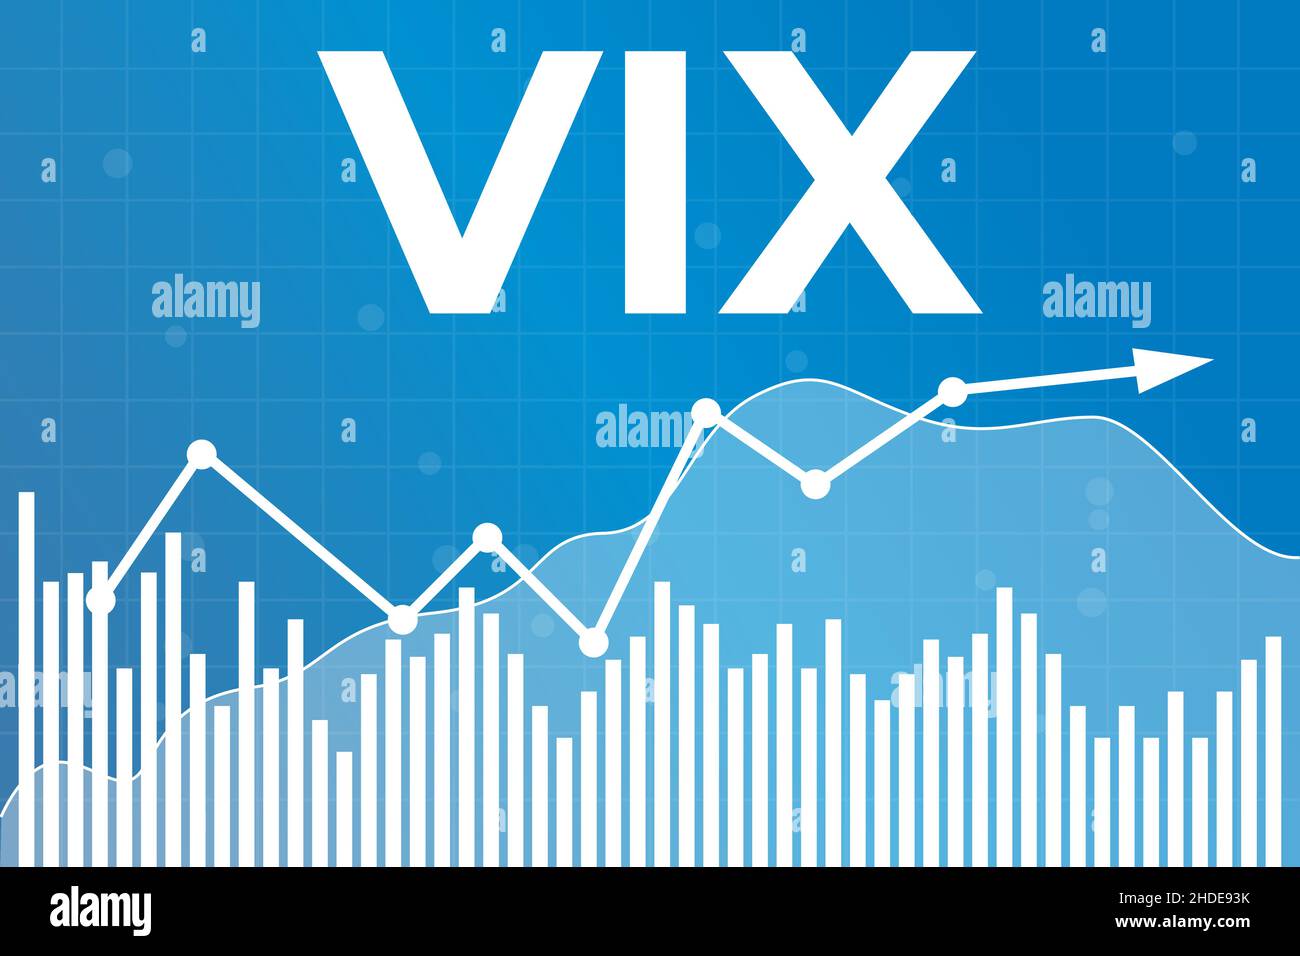 Word VIX (Volatility Index) on blue finance background with graphs, charts, columns, arrow. Financial market concept Stock Vector